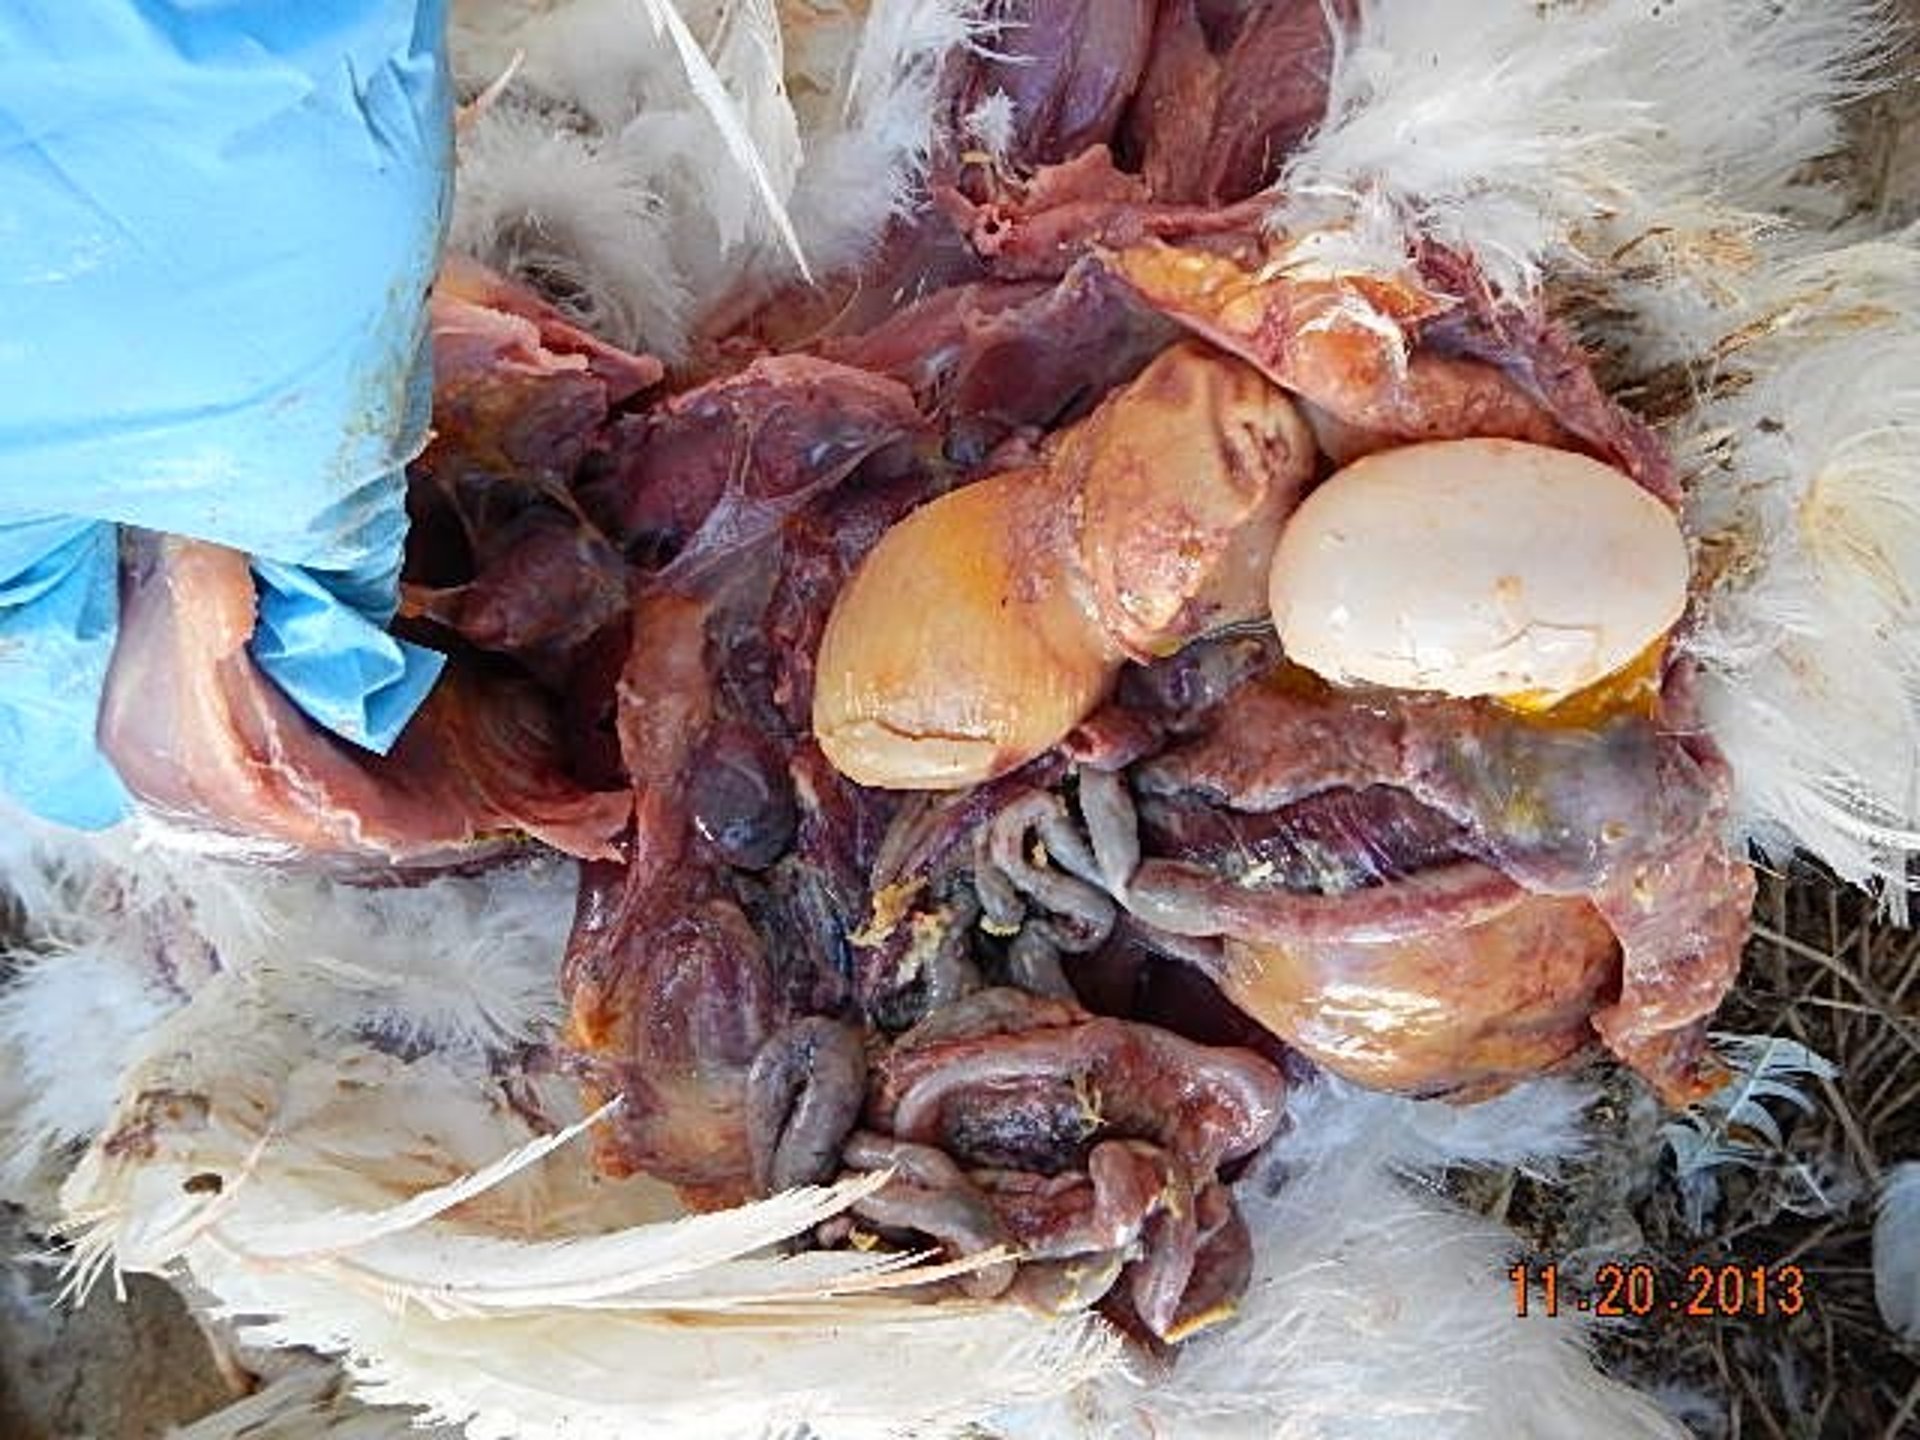 Impacted oviduct, chicken